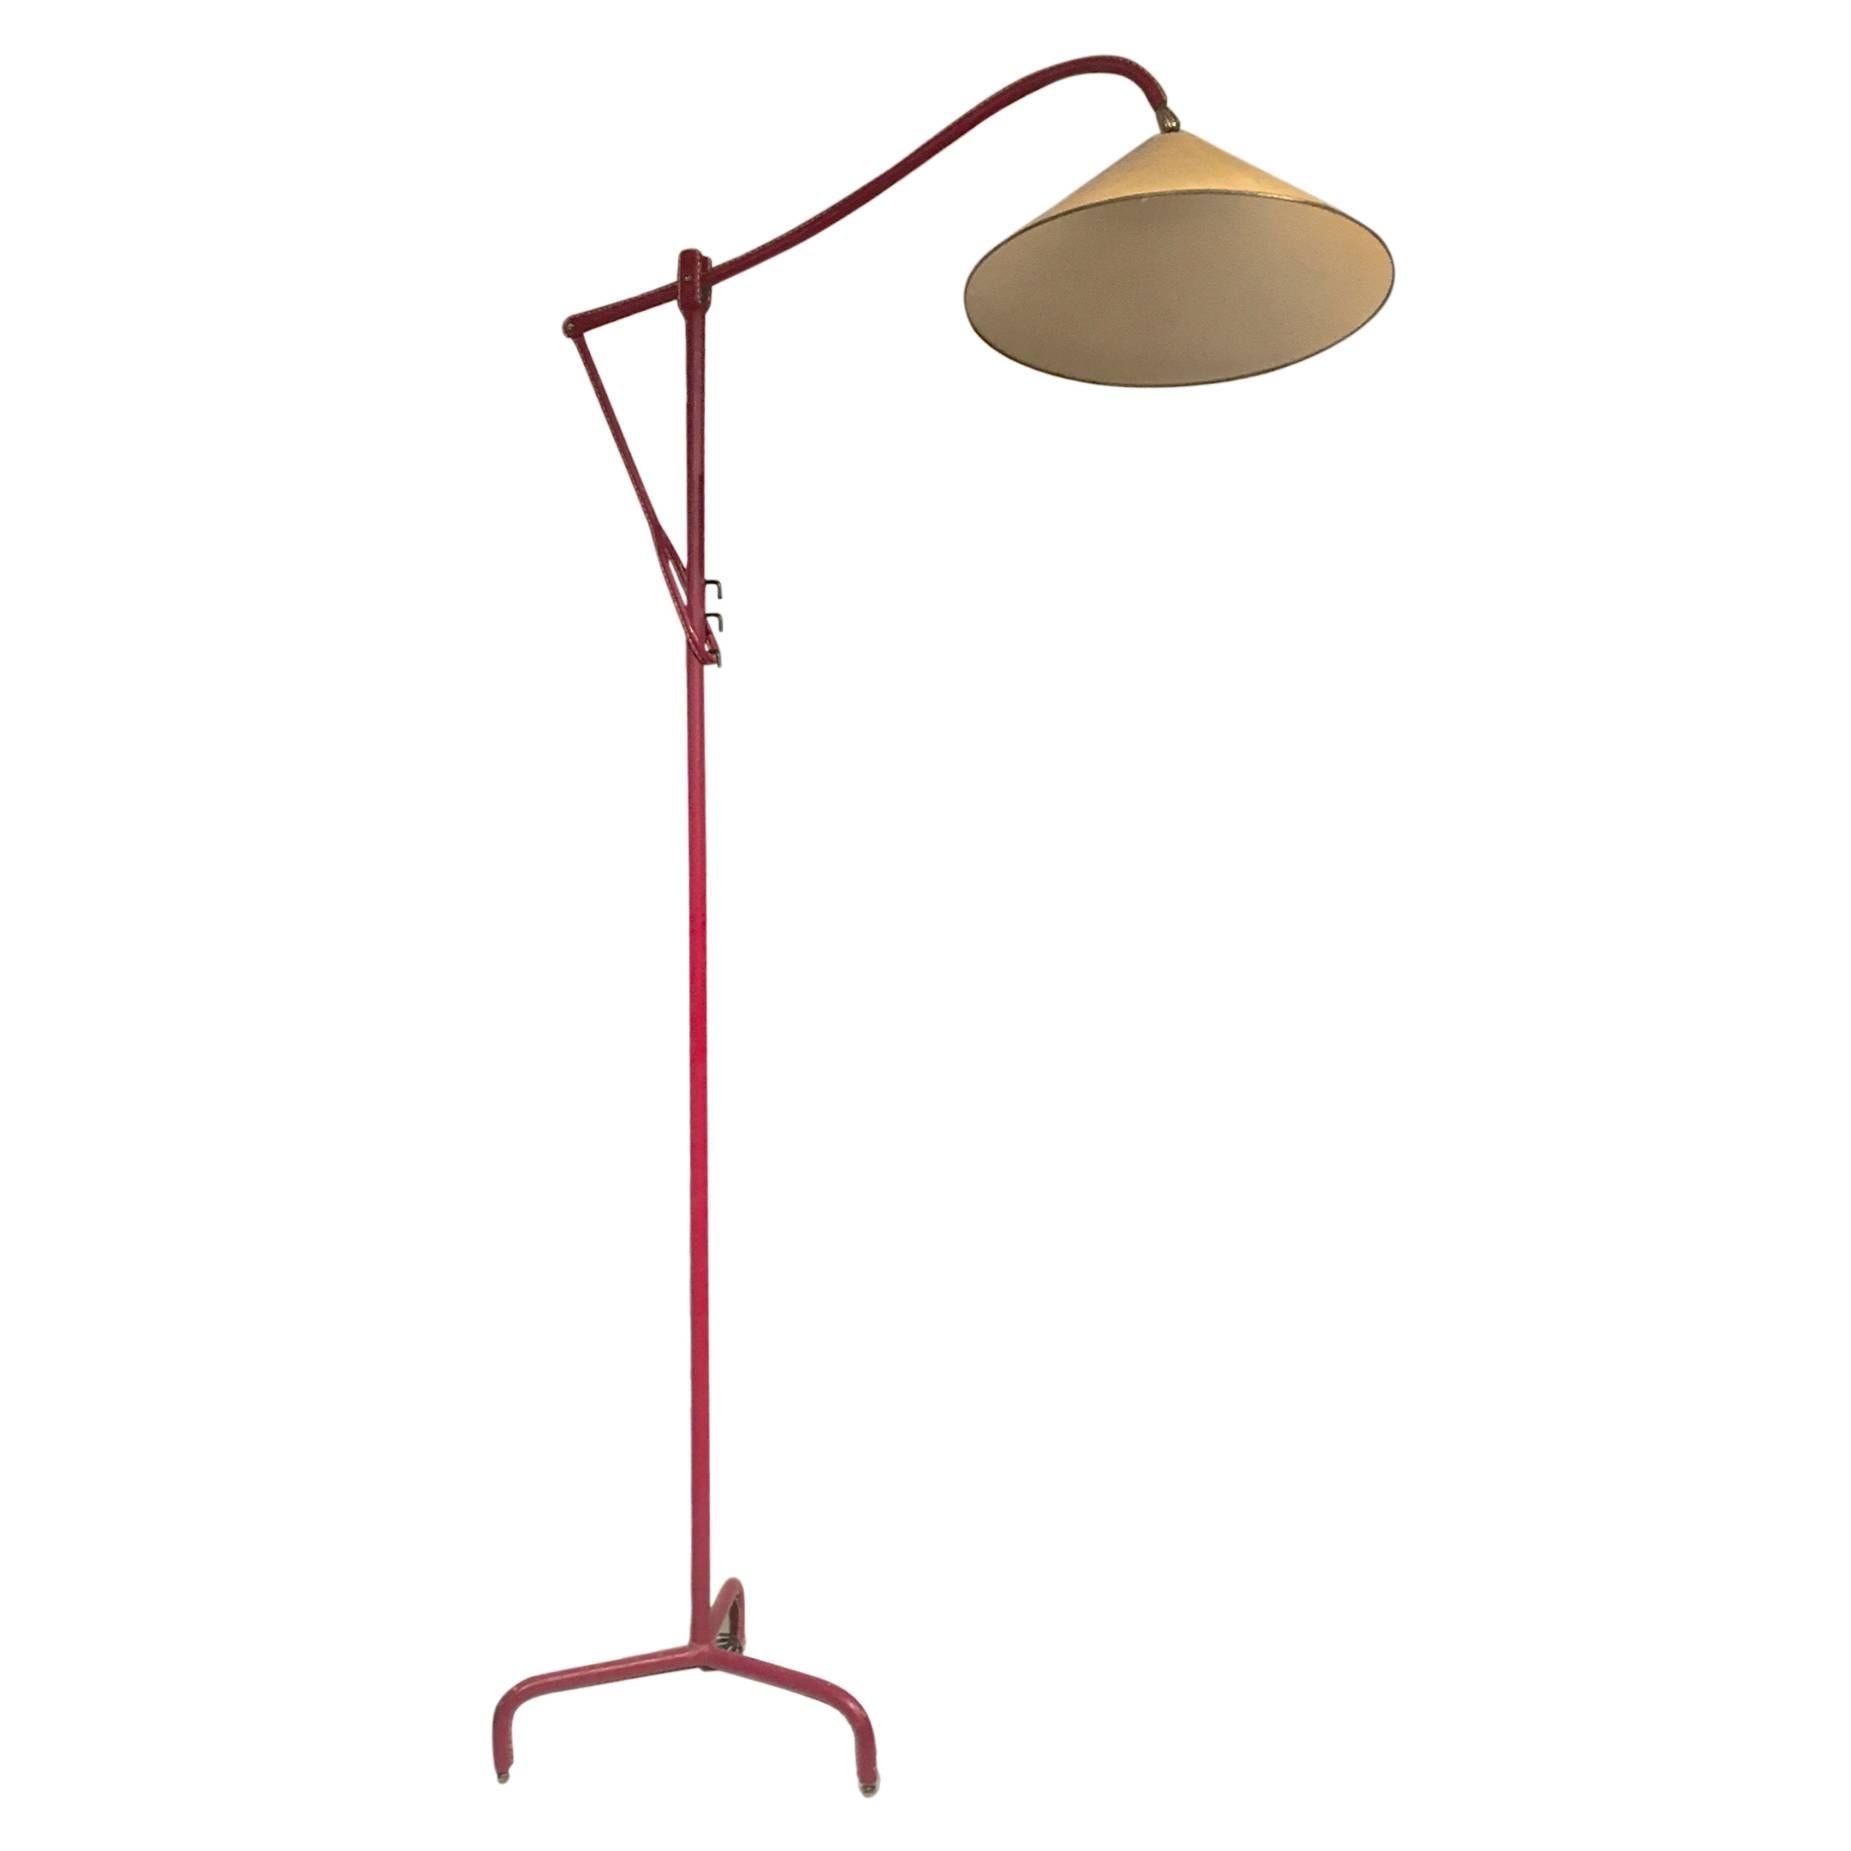 Jacques Adnet Hand-Stitched Leather Reclining Floor Lamp  in Red Hermès Color